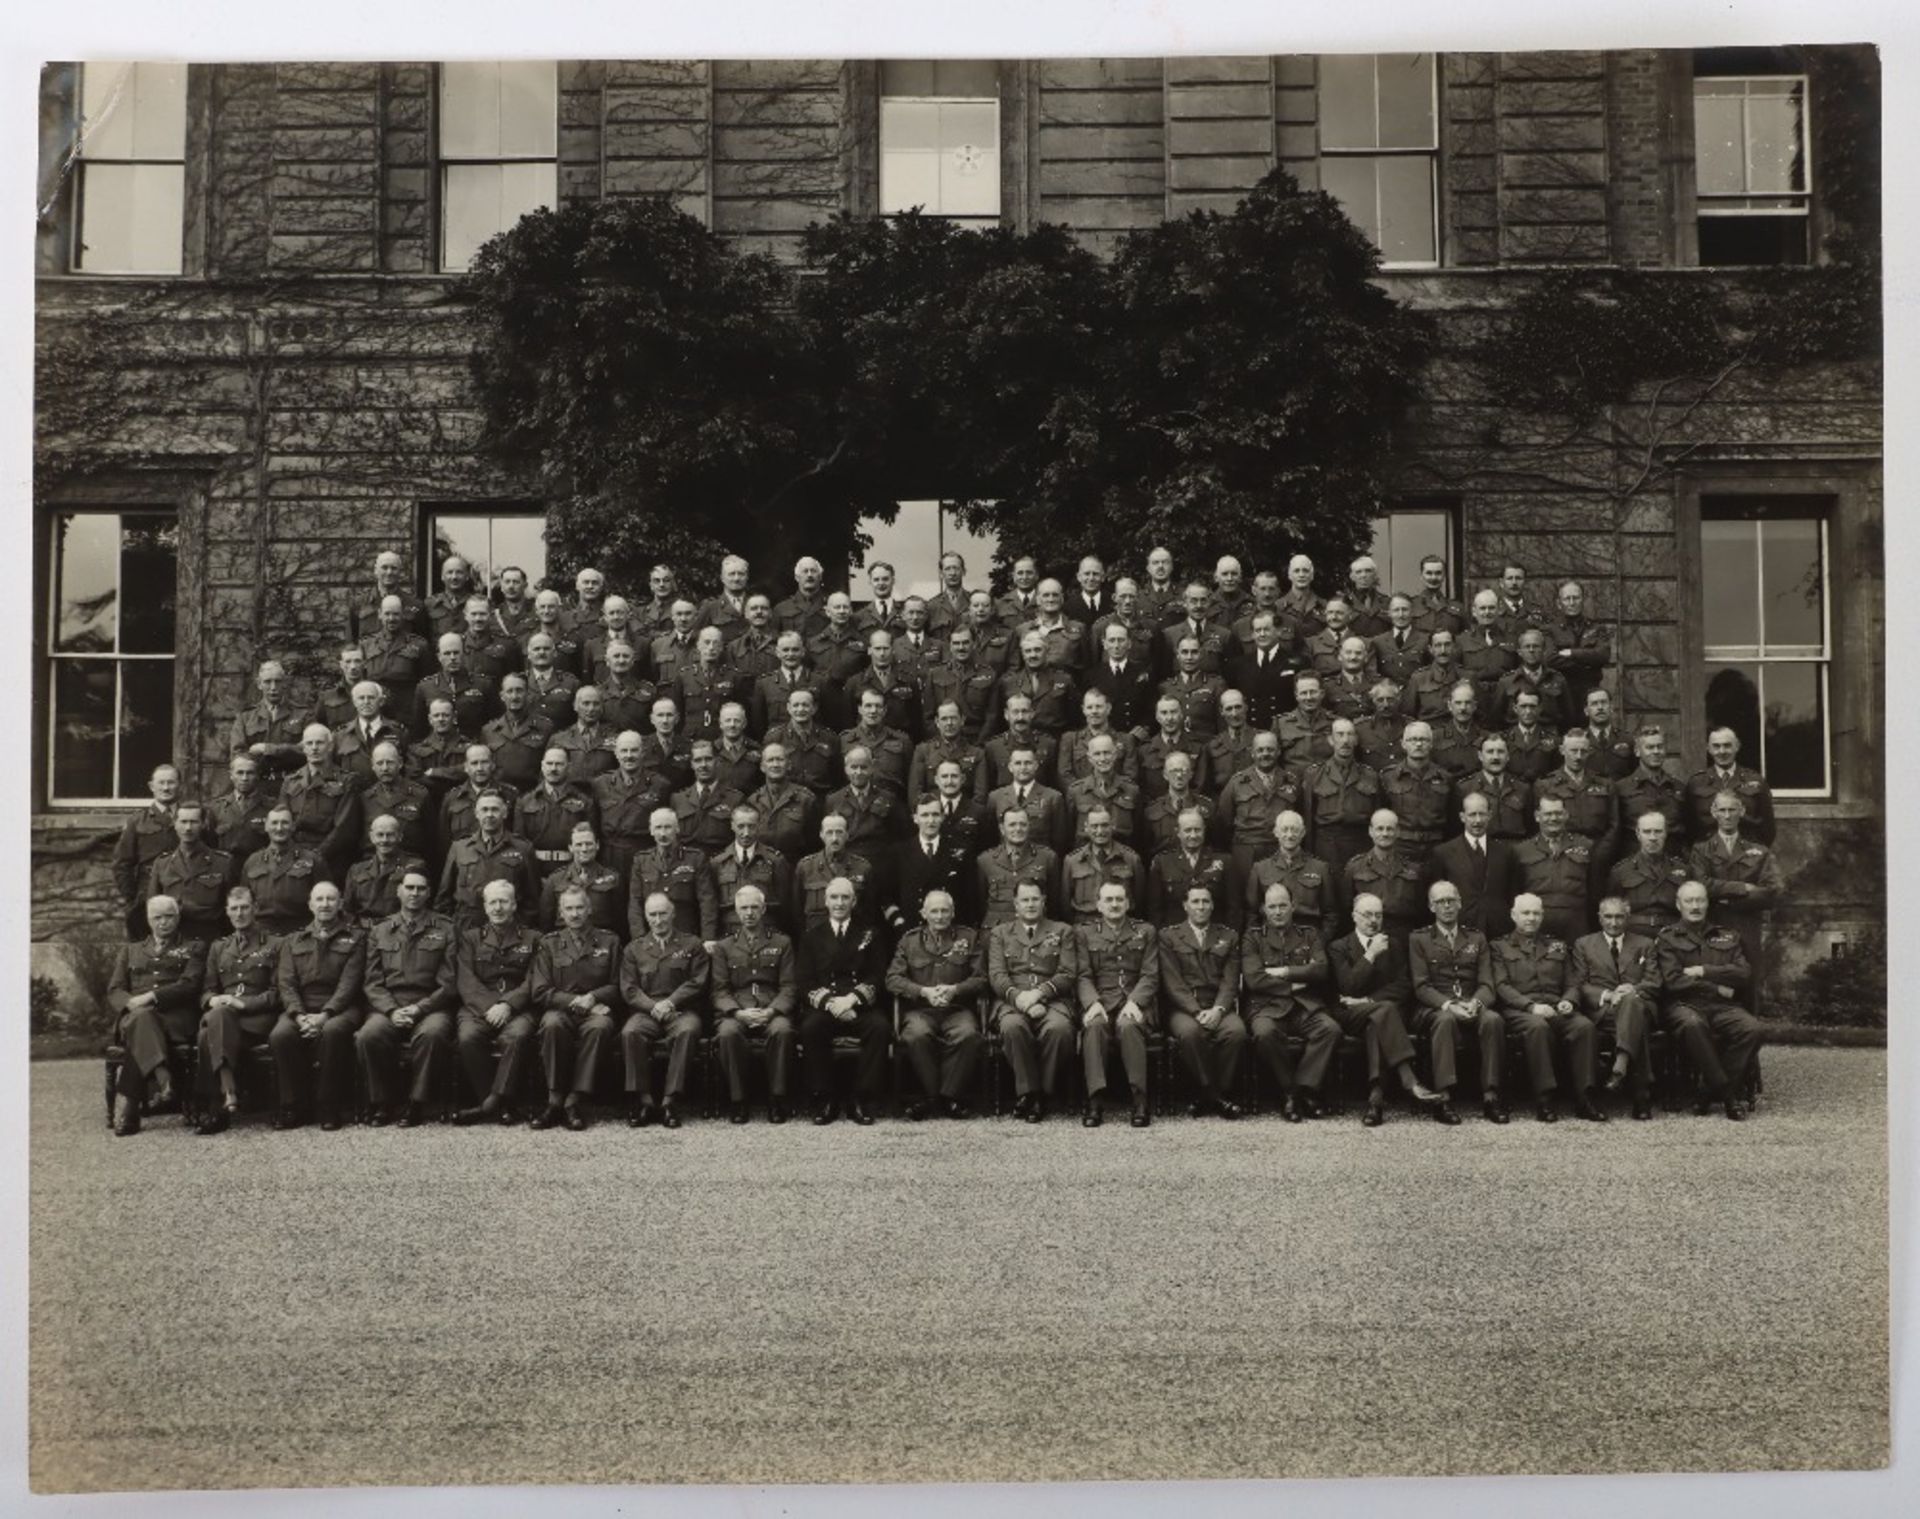 Important Group Photograph at C.I.G.S's Conference May 1948